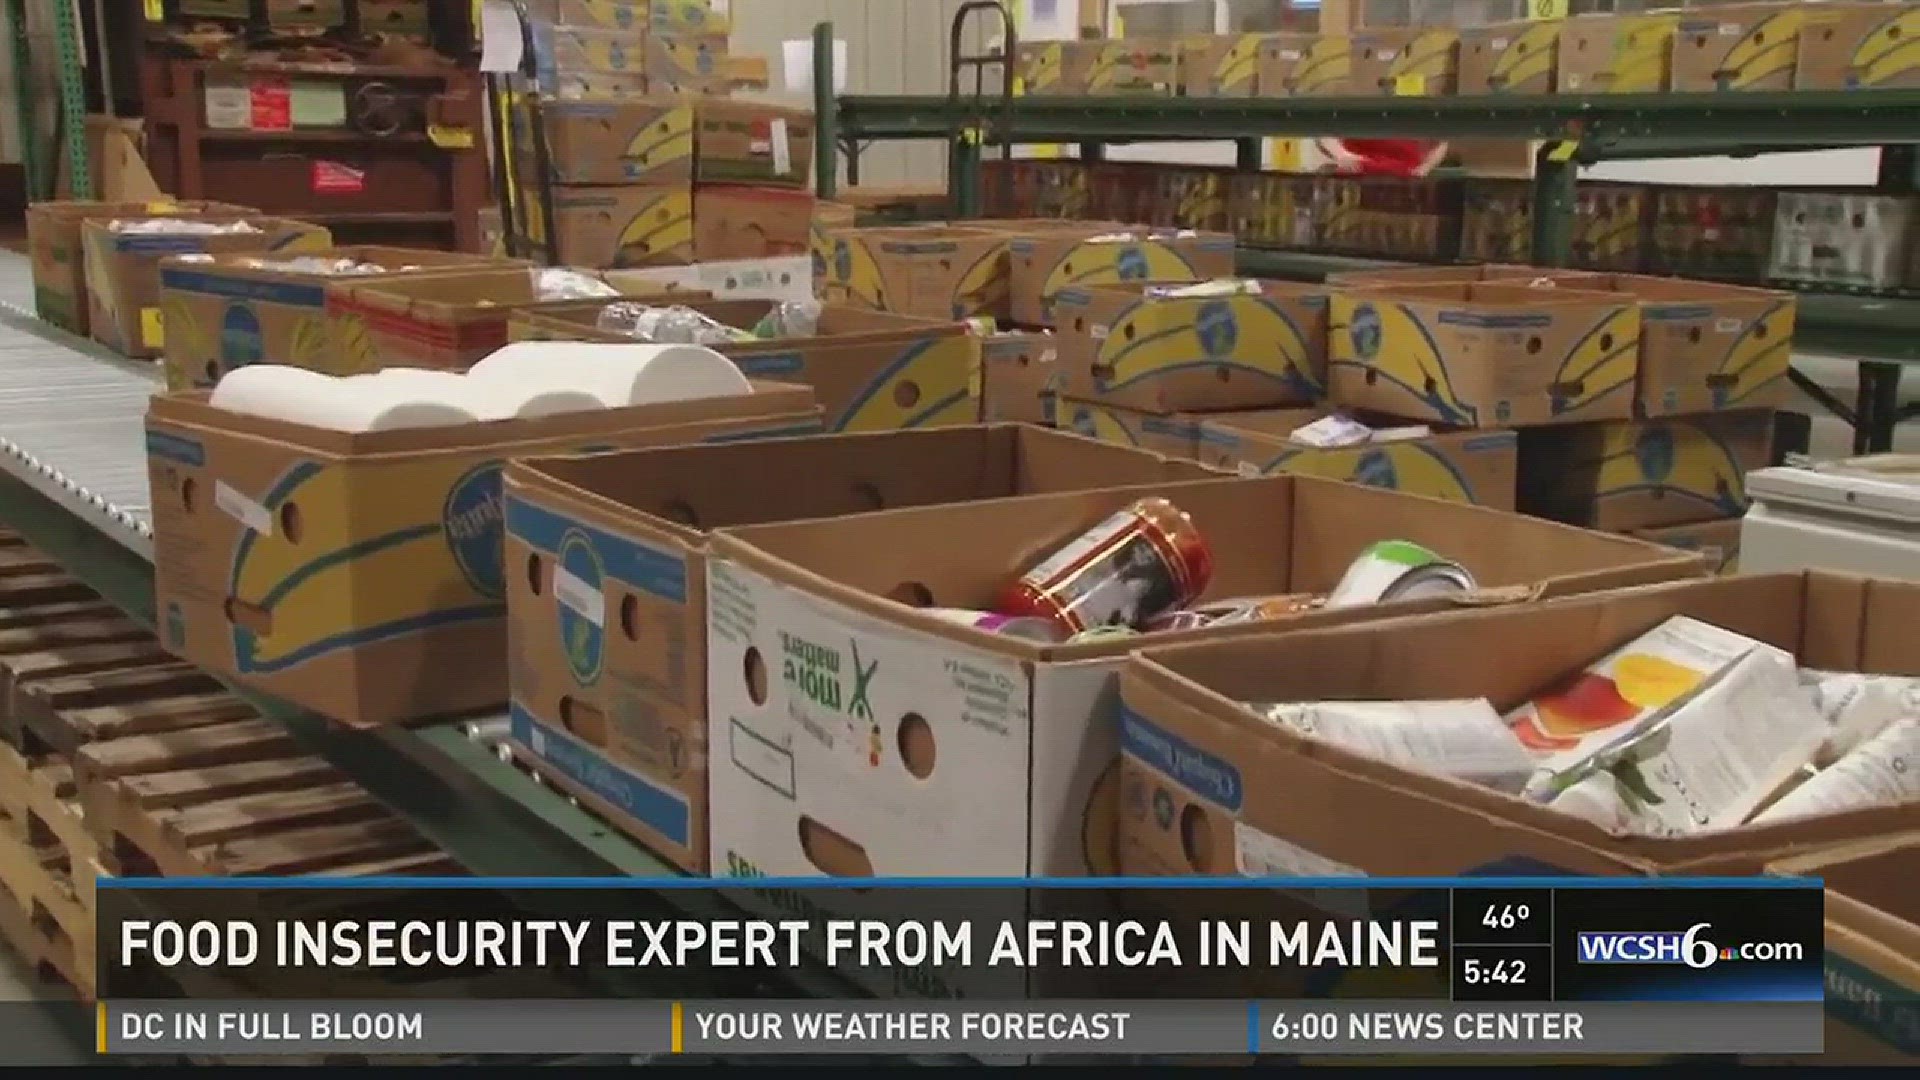 Expert discusses food insecurity